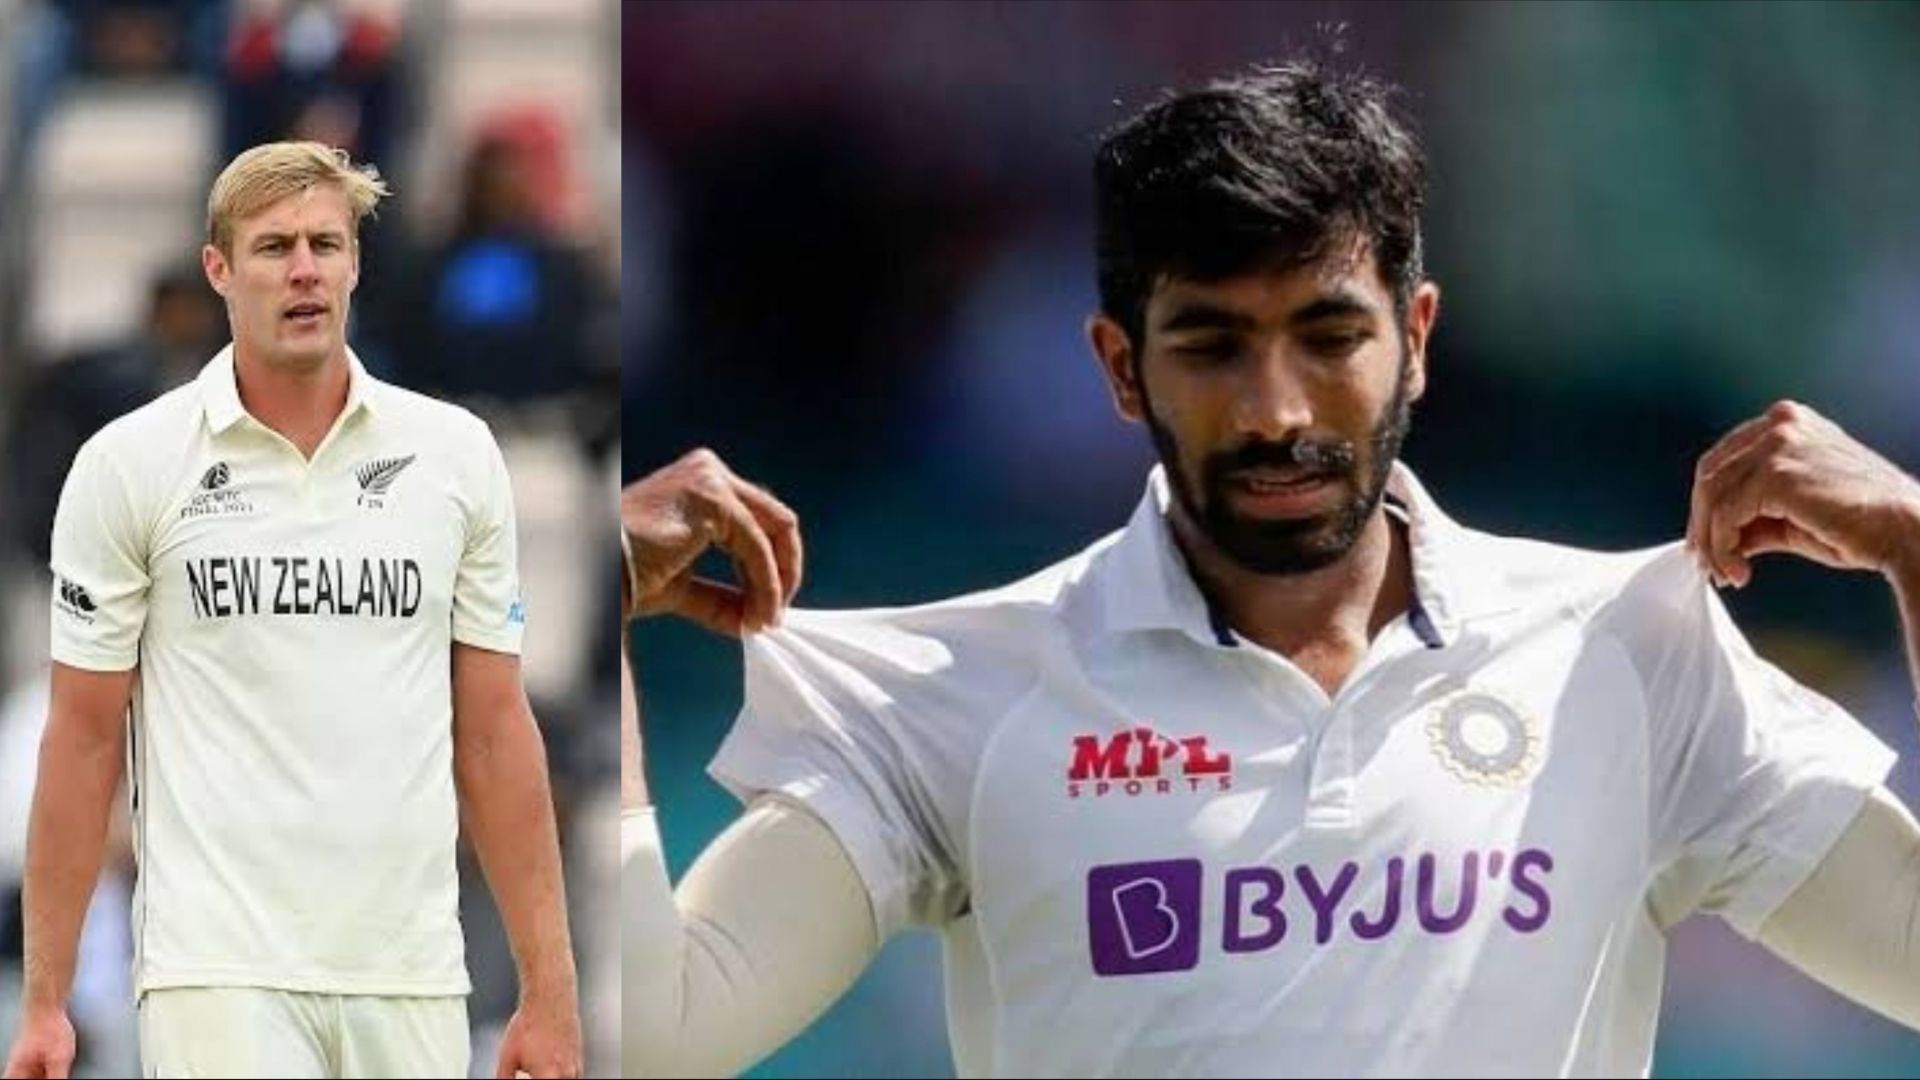 Kyle Jamieson (L) is now one spot ahead of Jasprit Bumrah in the ICC Test Rankings for Bowlers